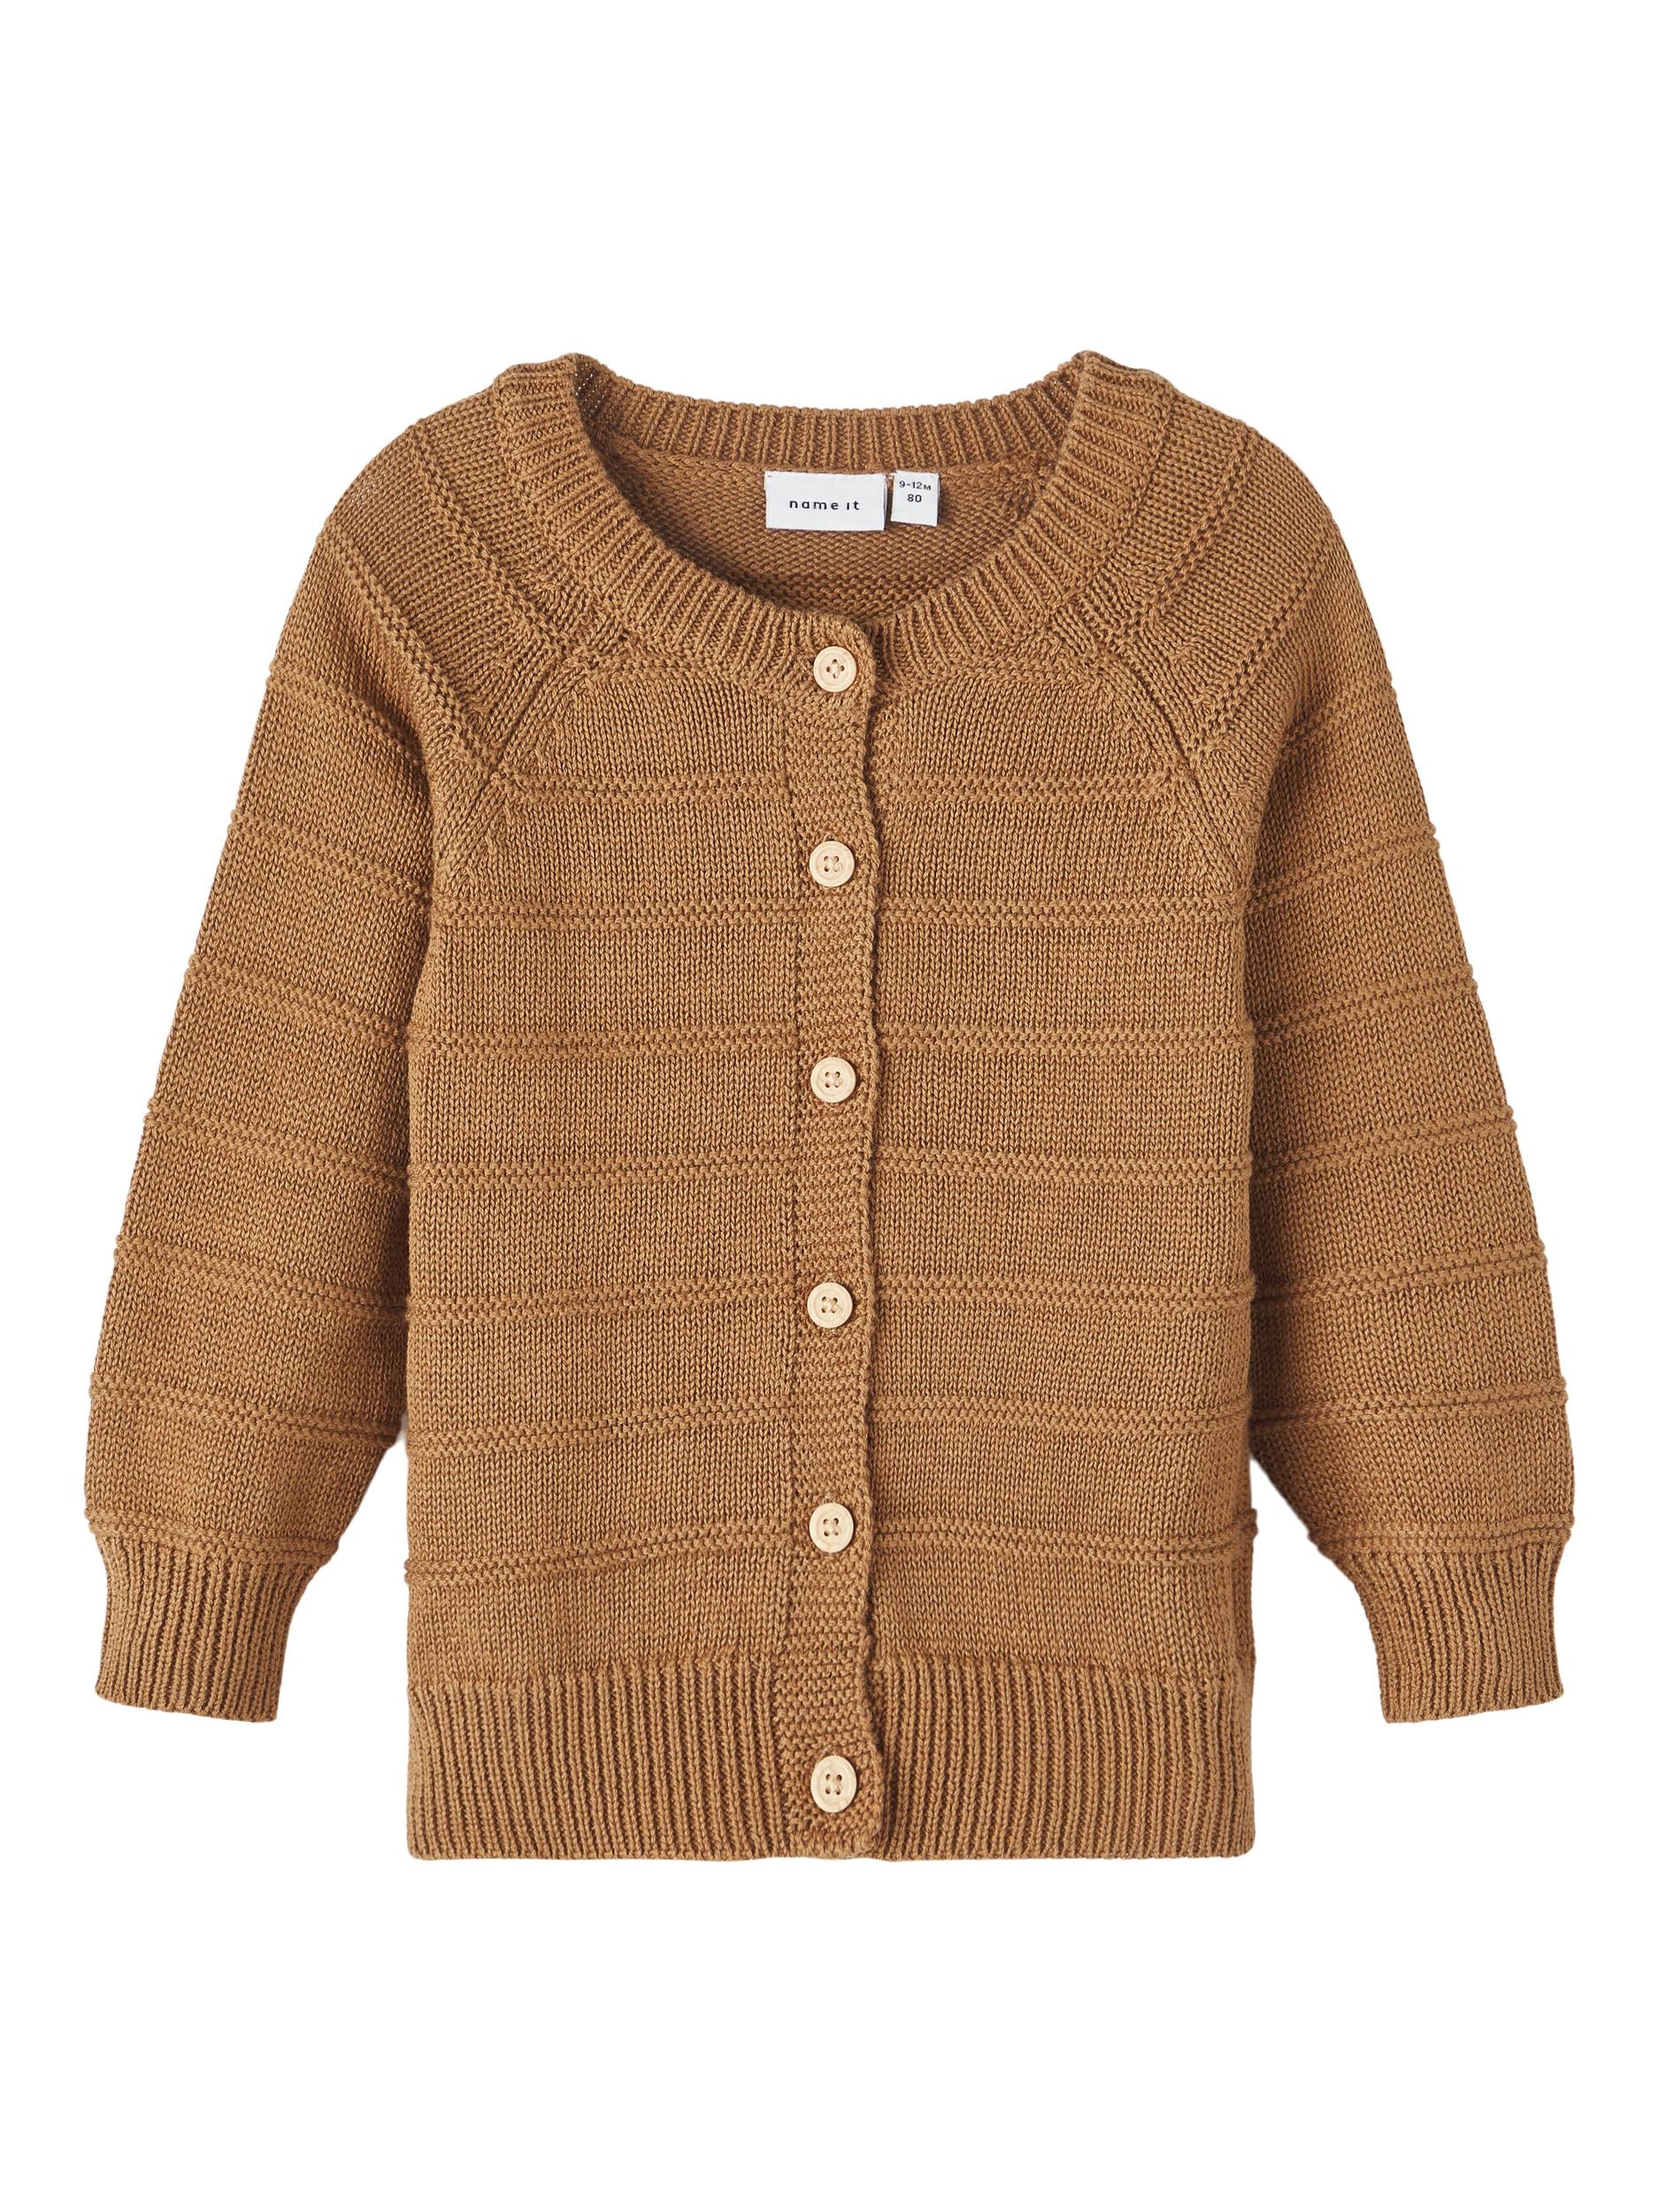 Boy's Toasted Coconut Bolan Long Sleeve Knit Cardigan-Front View